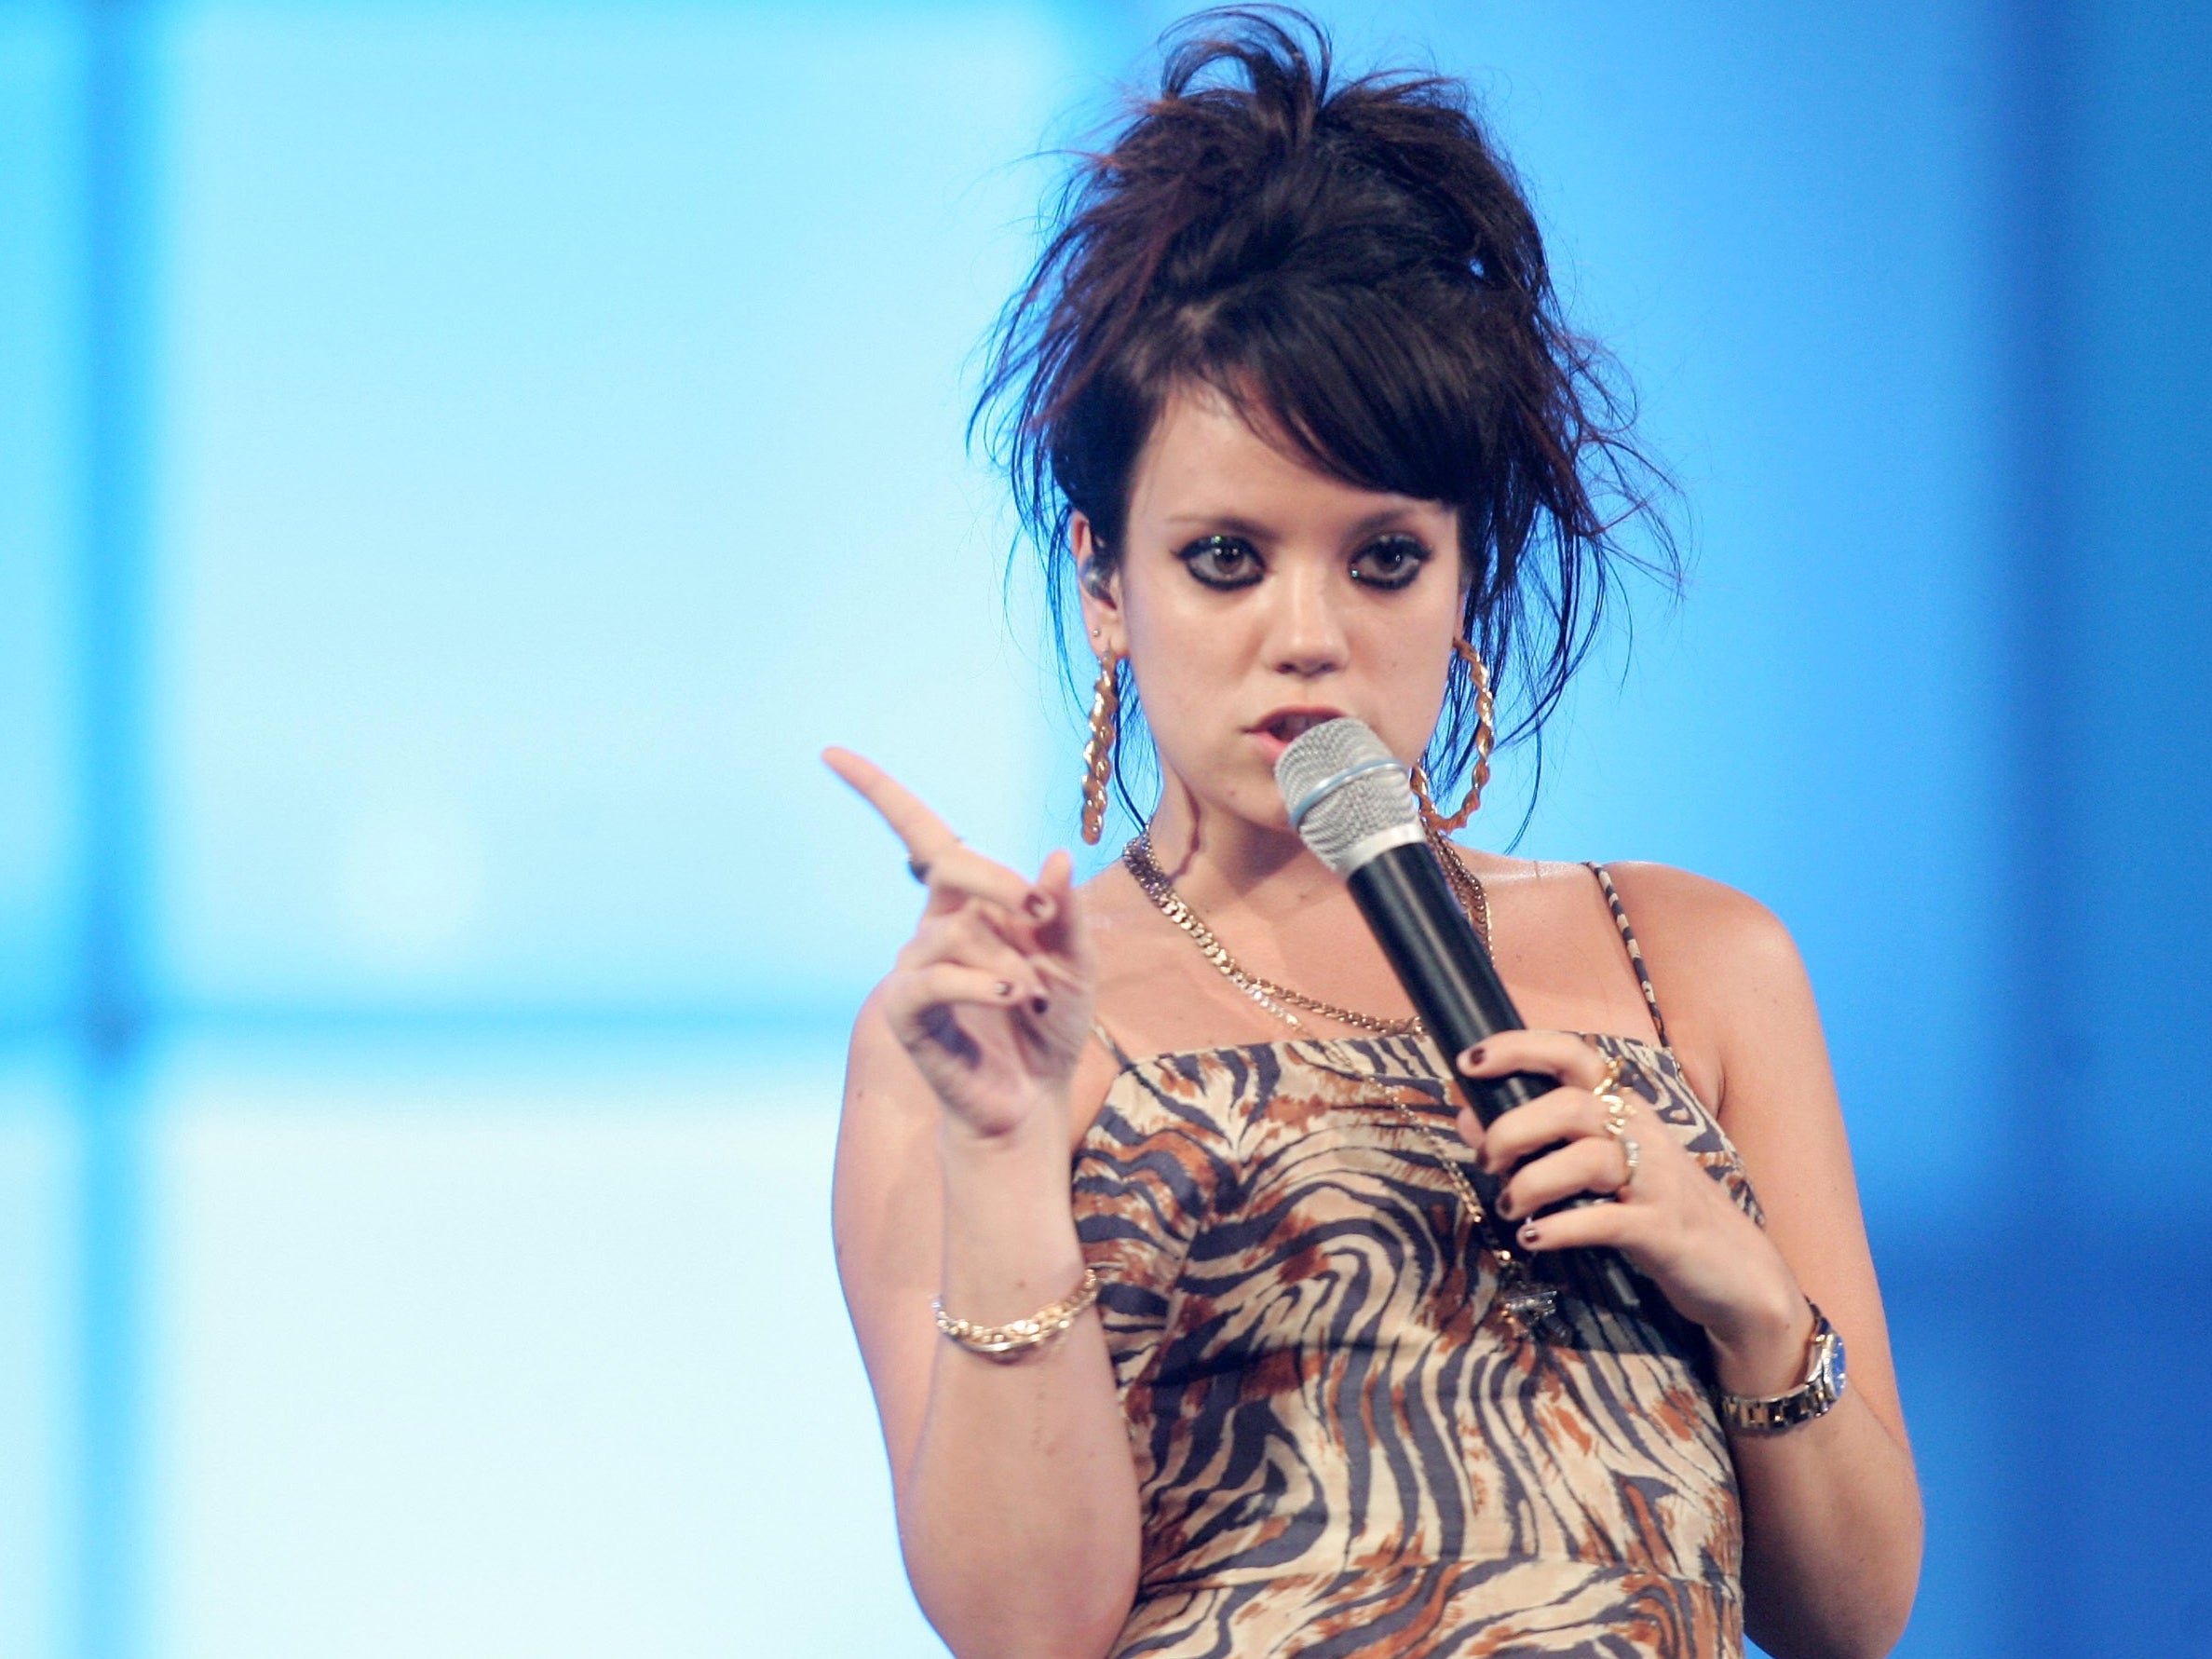 lily allen, keith allen, lily allen says she was ‘shocked’ by backlash to noughties antics